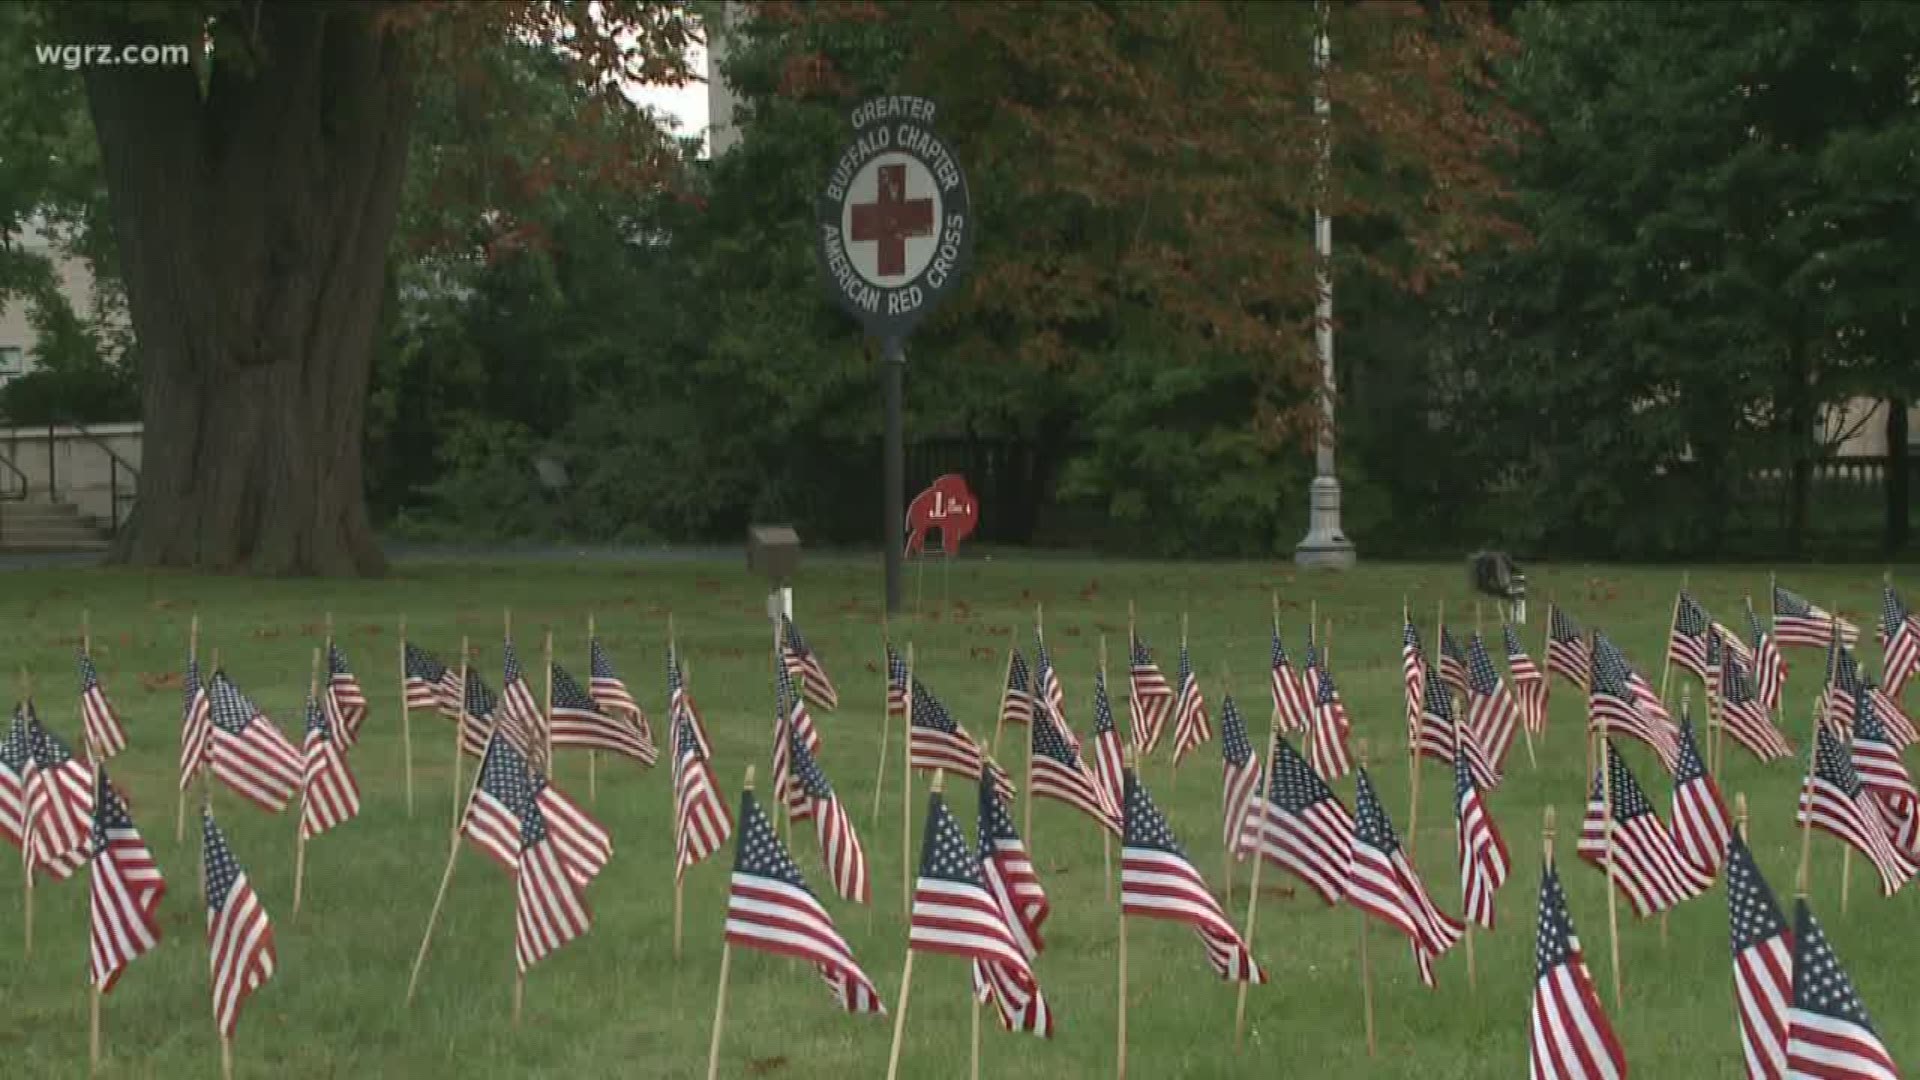 9/11 Flags on display outside Red Cross